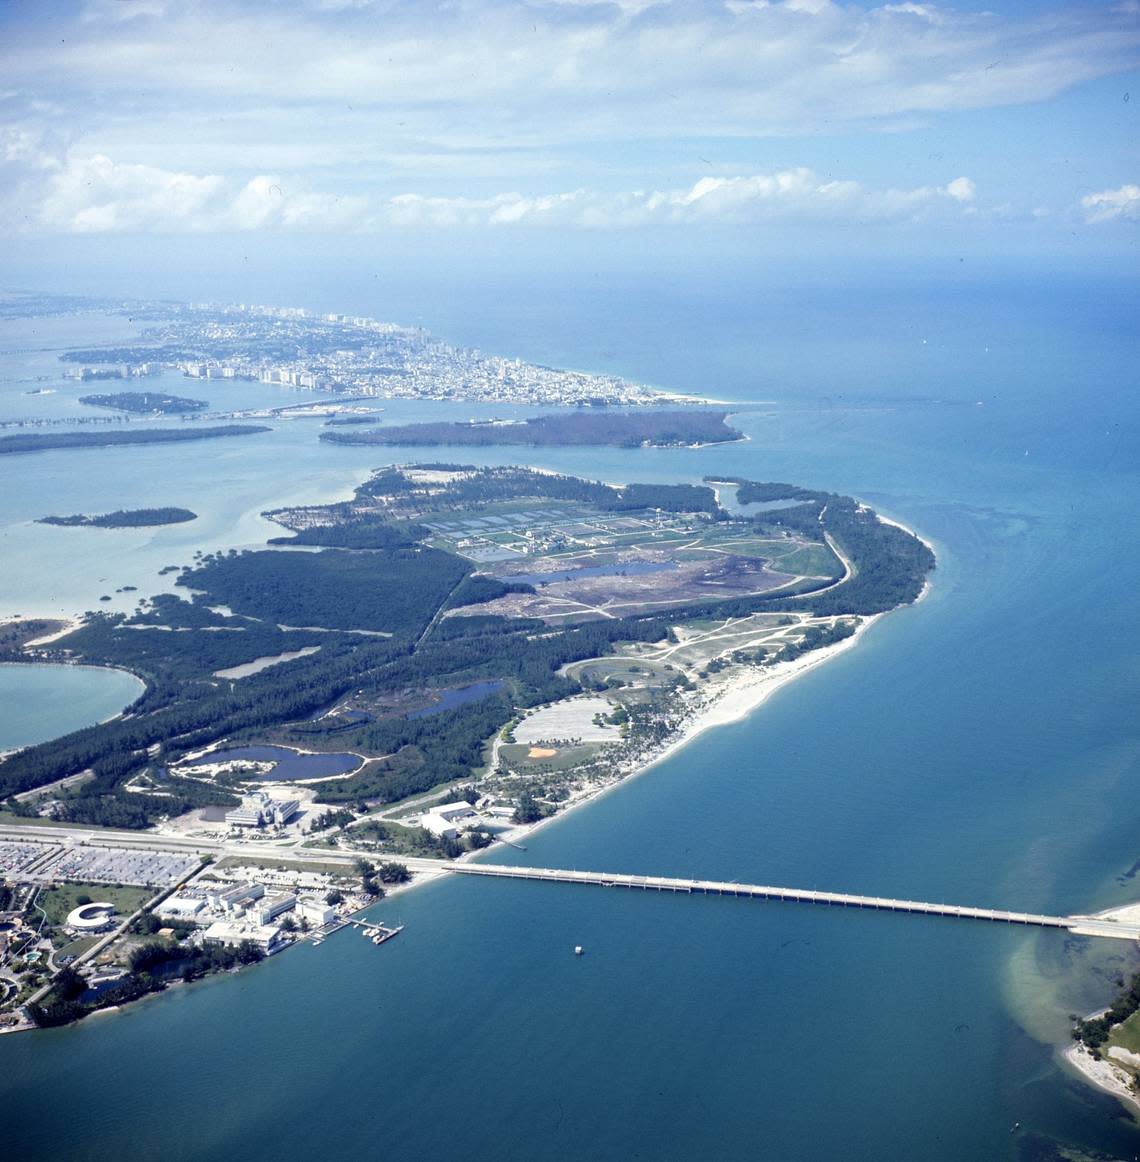 A 1972 aerial view of Virginia Key, showing the scope of Virginia Key, the historic Virginia Key Beach Park and the Rickenbacker Causeway in the foreground. Fisher Island, which had not been developed yet, is the island behind Virginia Key. Miami Beach is in the background, facing the Atlantic Ocean.